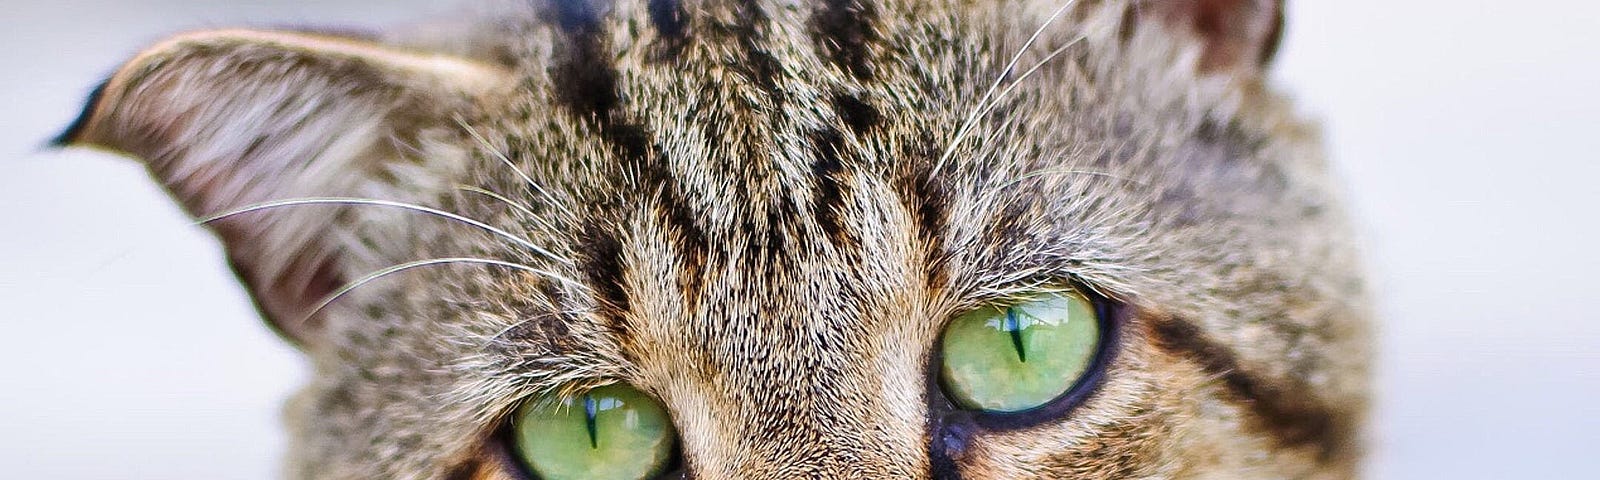 Photo of an old brown and grey cat with green eyes and an sad expression